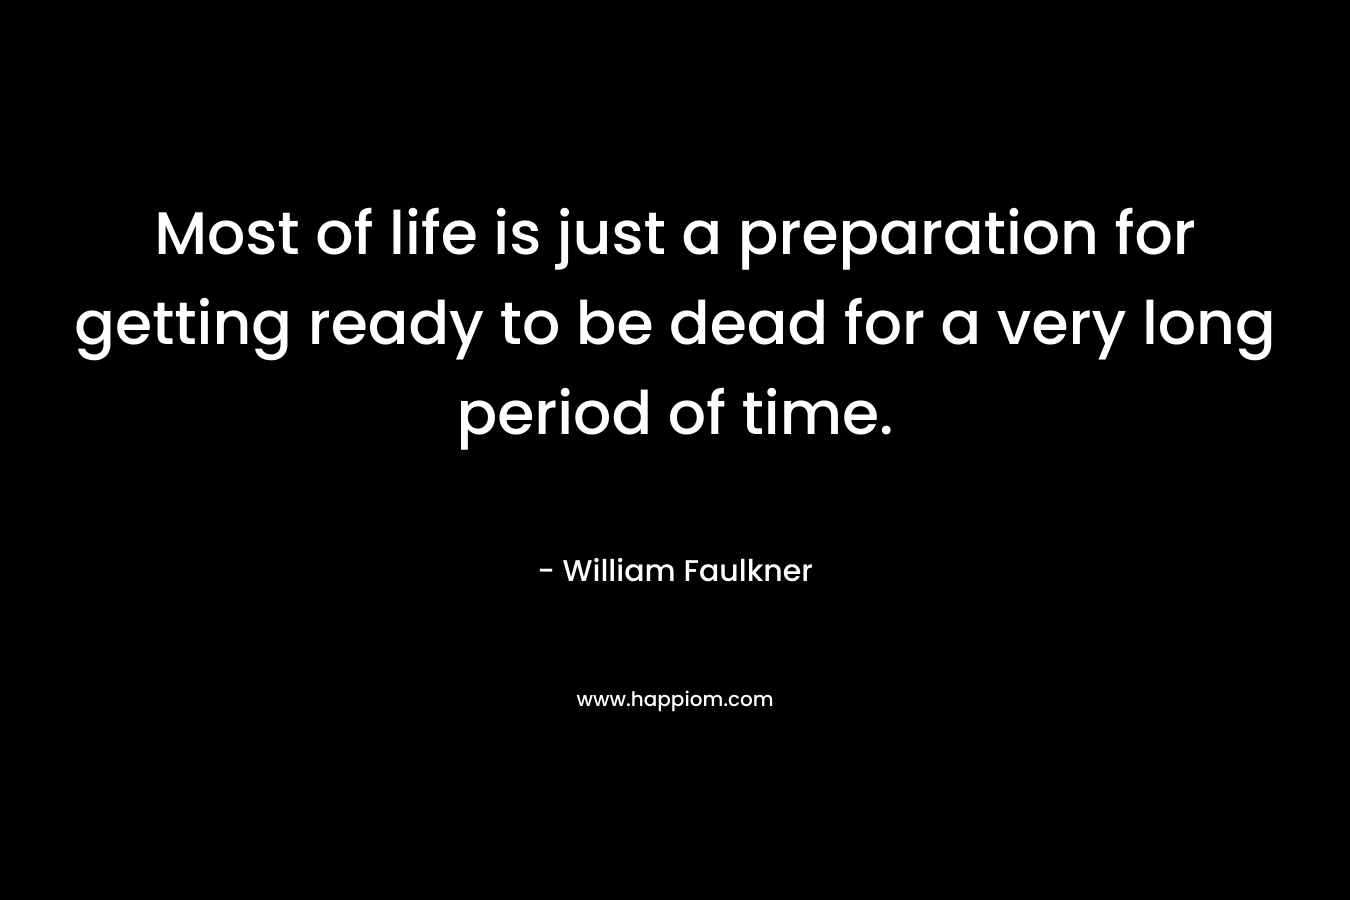 Most of life is just a preparation for getting ready to be dead for a very long period of time.